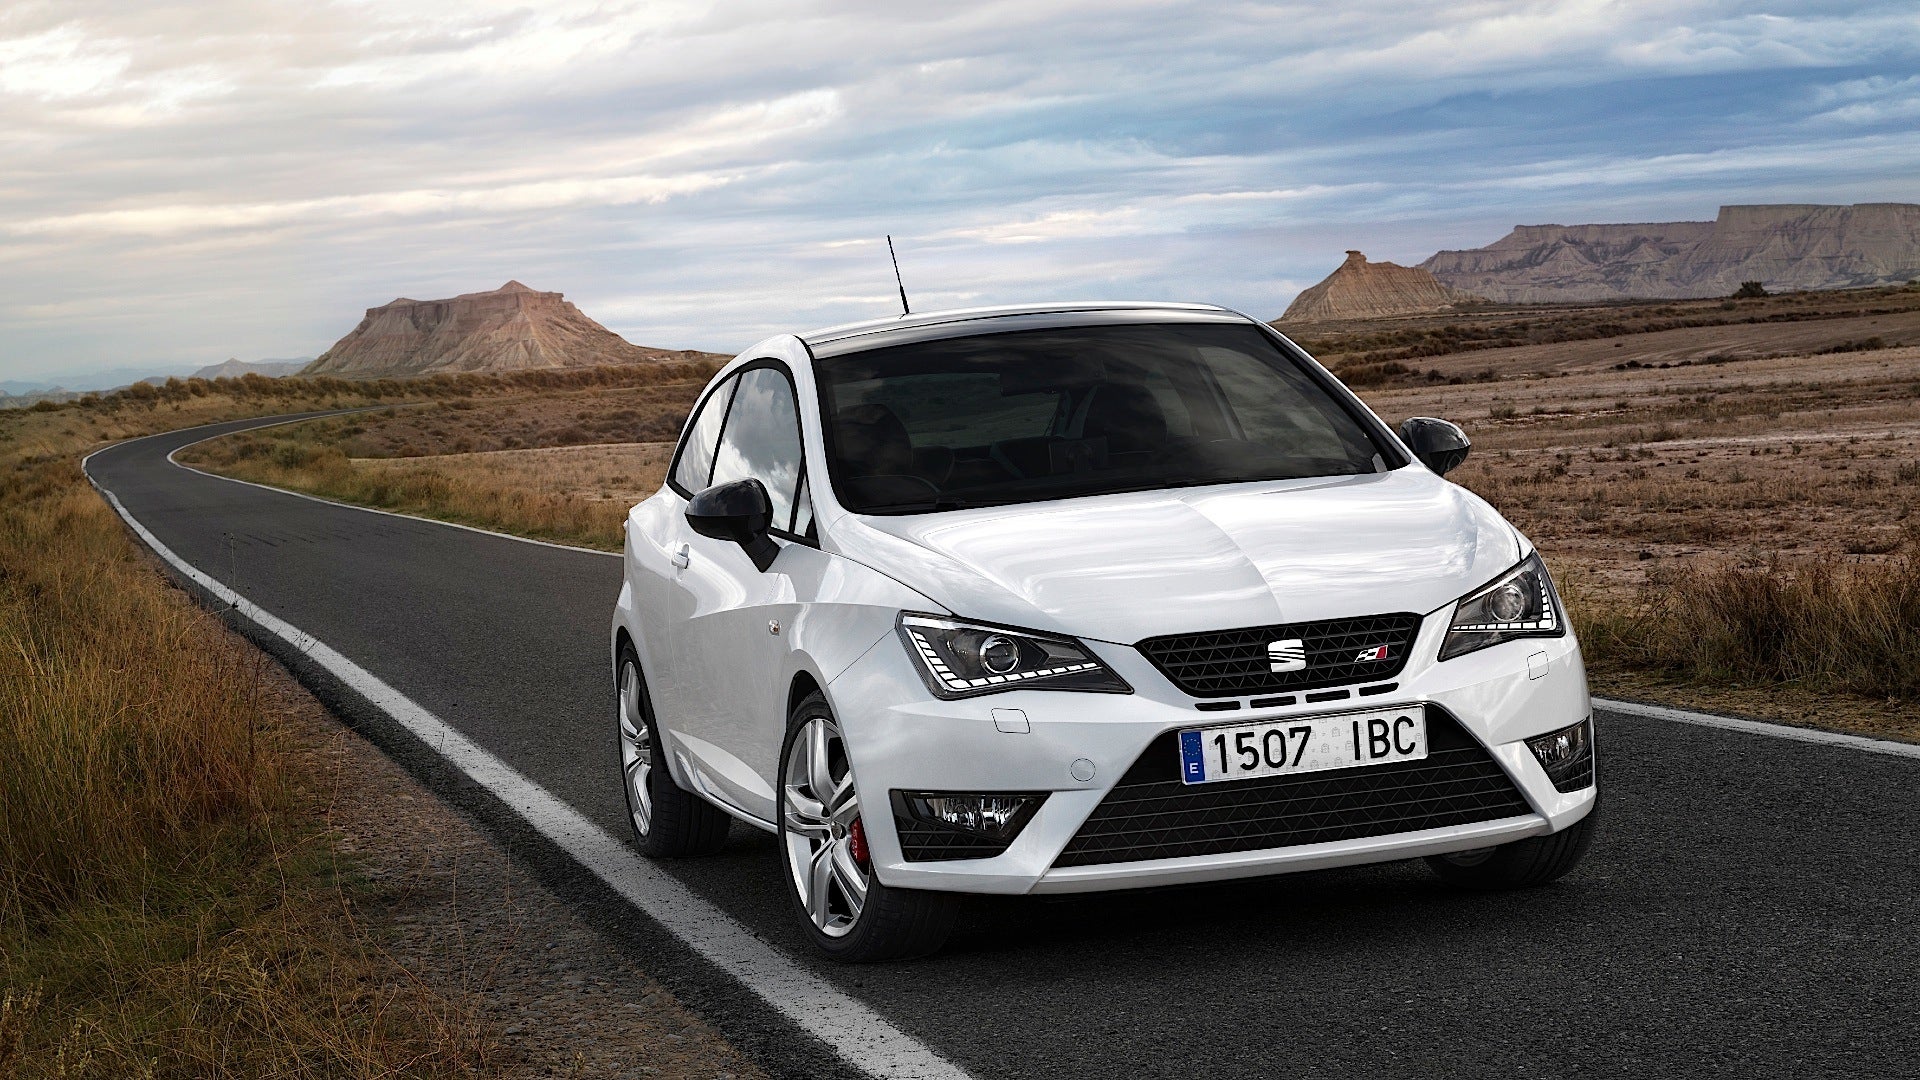 SEAT Trademarks ‘Cupra’ Name, Rumored to be Creating Performance Division